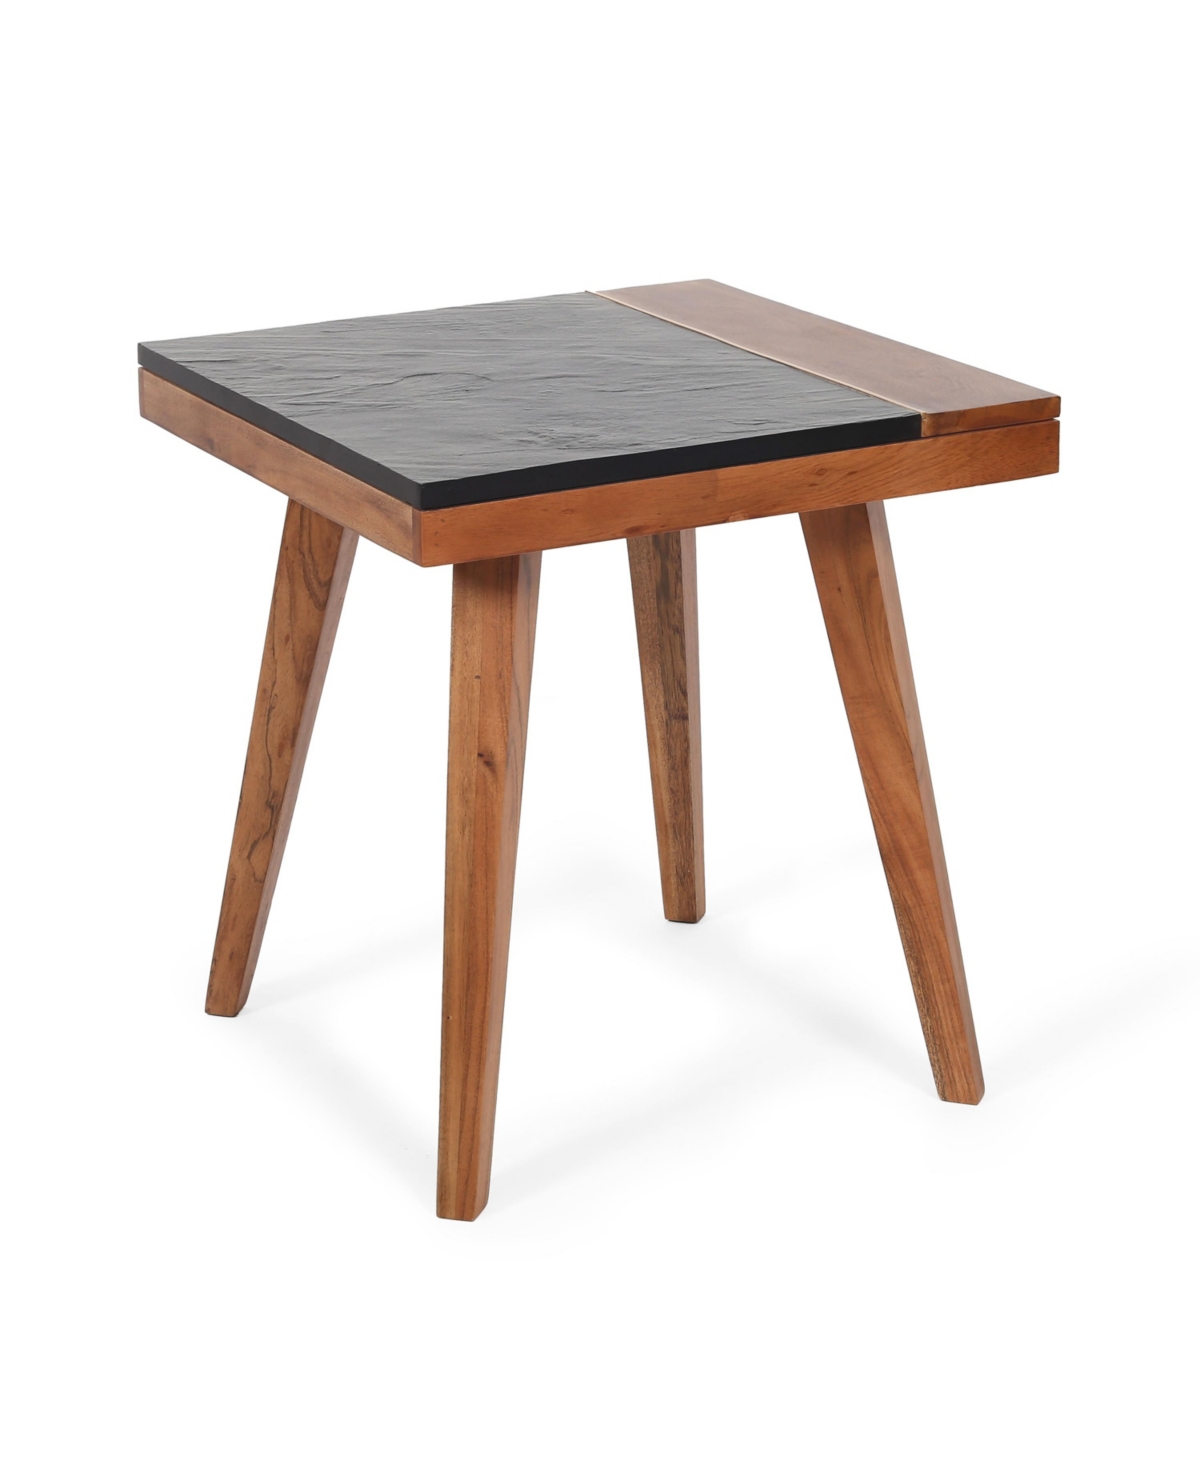 Steve Silver Caspian 19.75" Square Solid Acacia With Slate Inlay End Table In Natural Matte Finish With Charcoal Slate